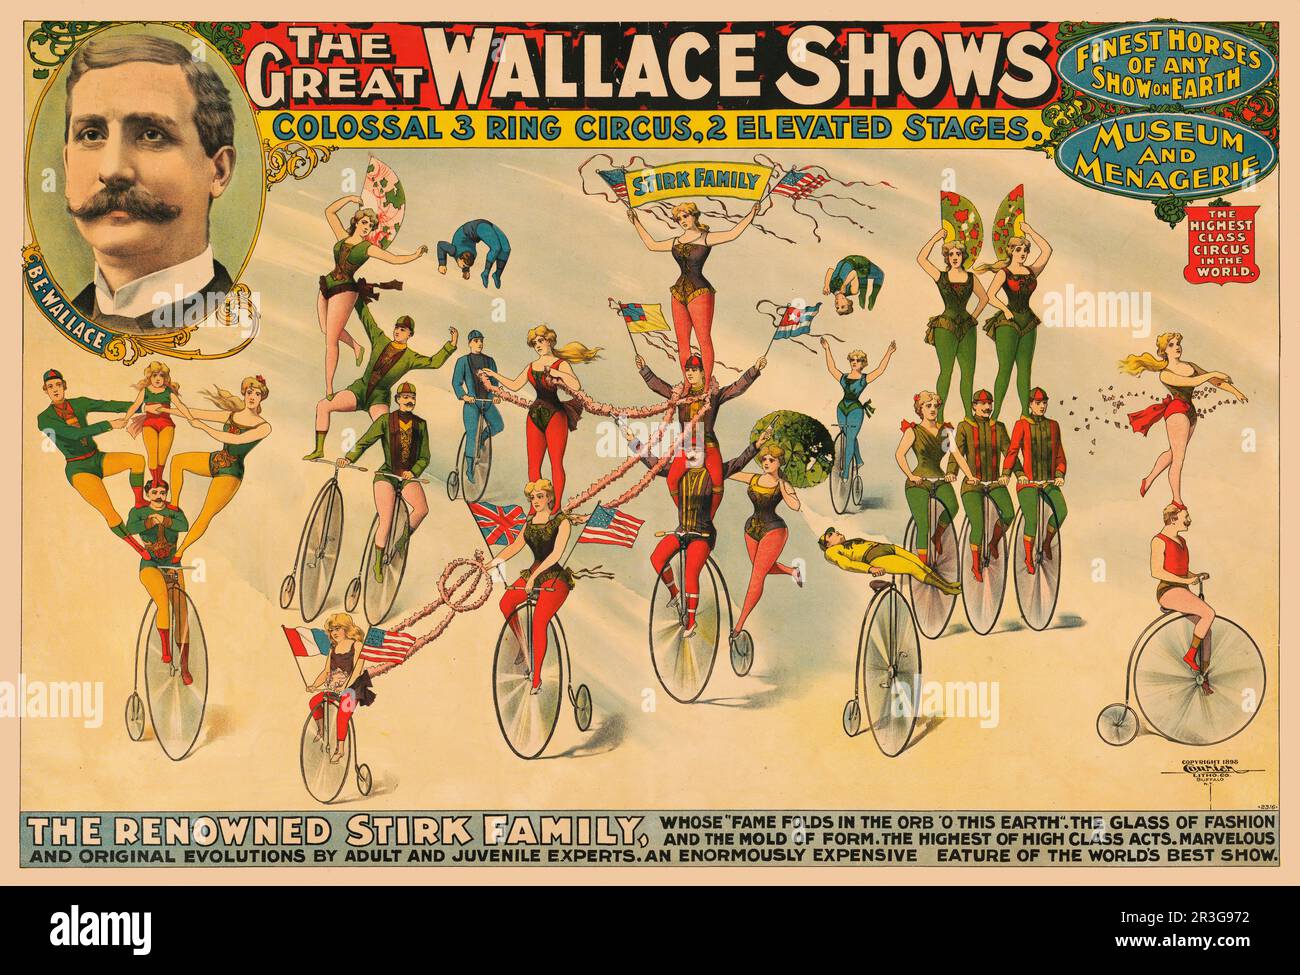 Vintage poster advertising The Great Wallace Shows circus, showing the Stirk Family performing acrobatics on bicycles, circa 1898. Stock Photo